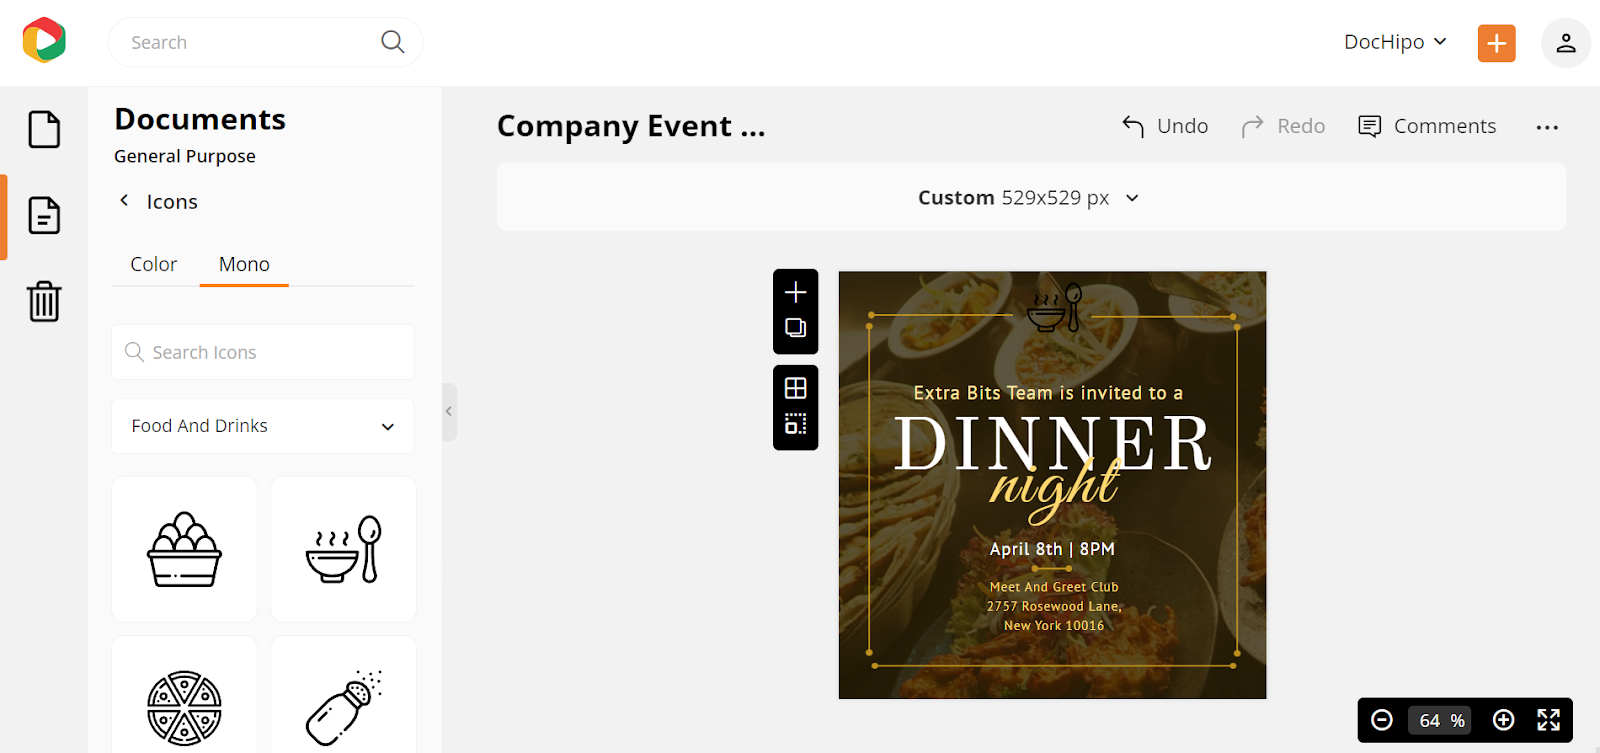 Company event invitation design after resizing and repositioning the icon